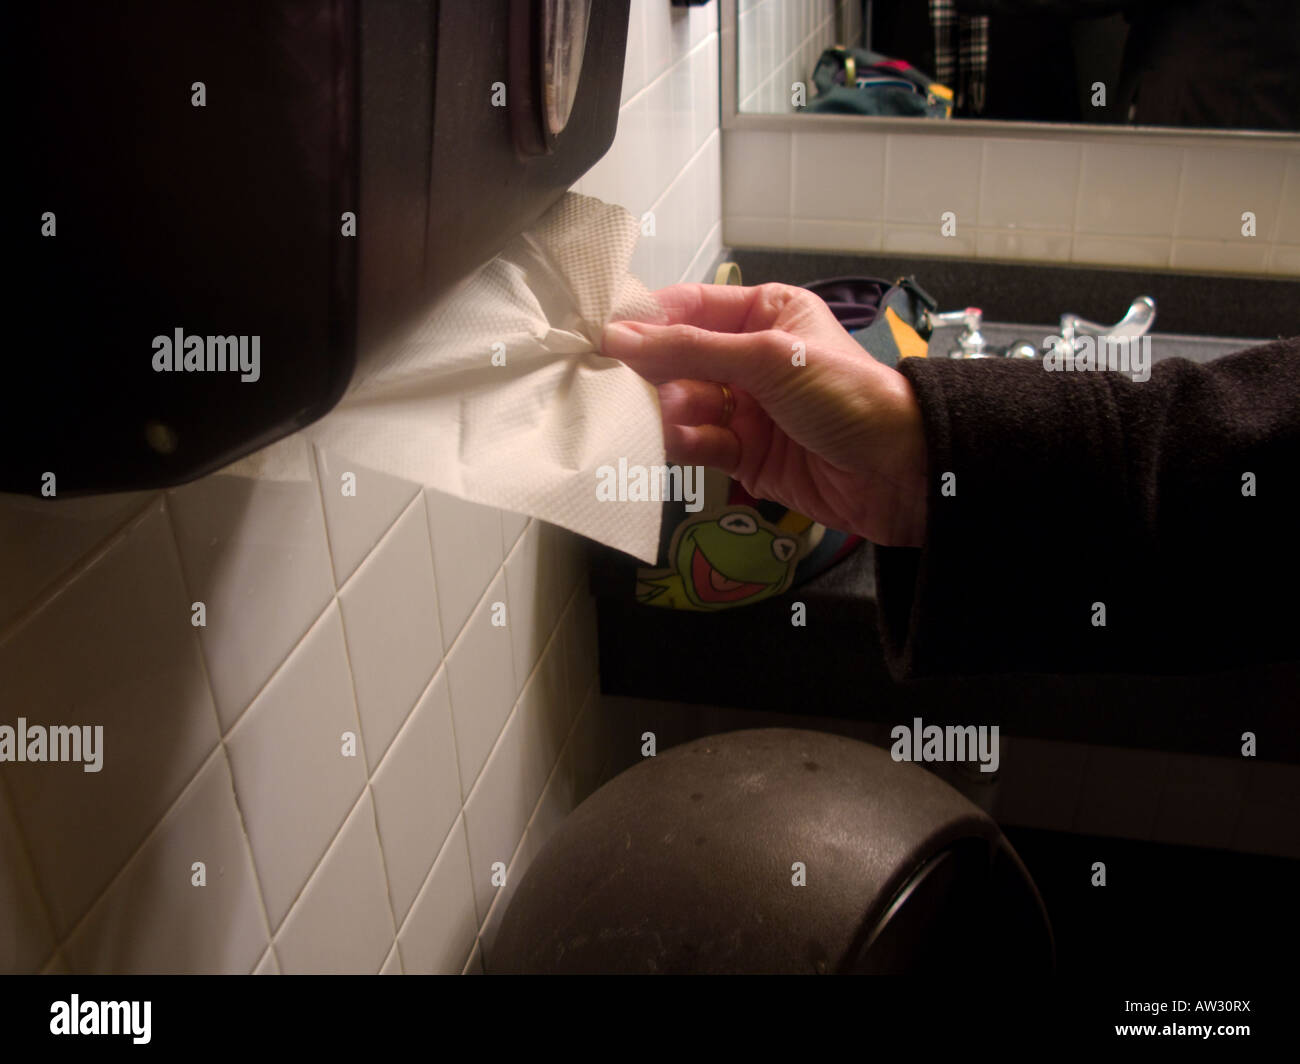 A caucasian woman extracts a paper towel after washing her hands in a public restroom. USA. Stock Photo